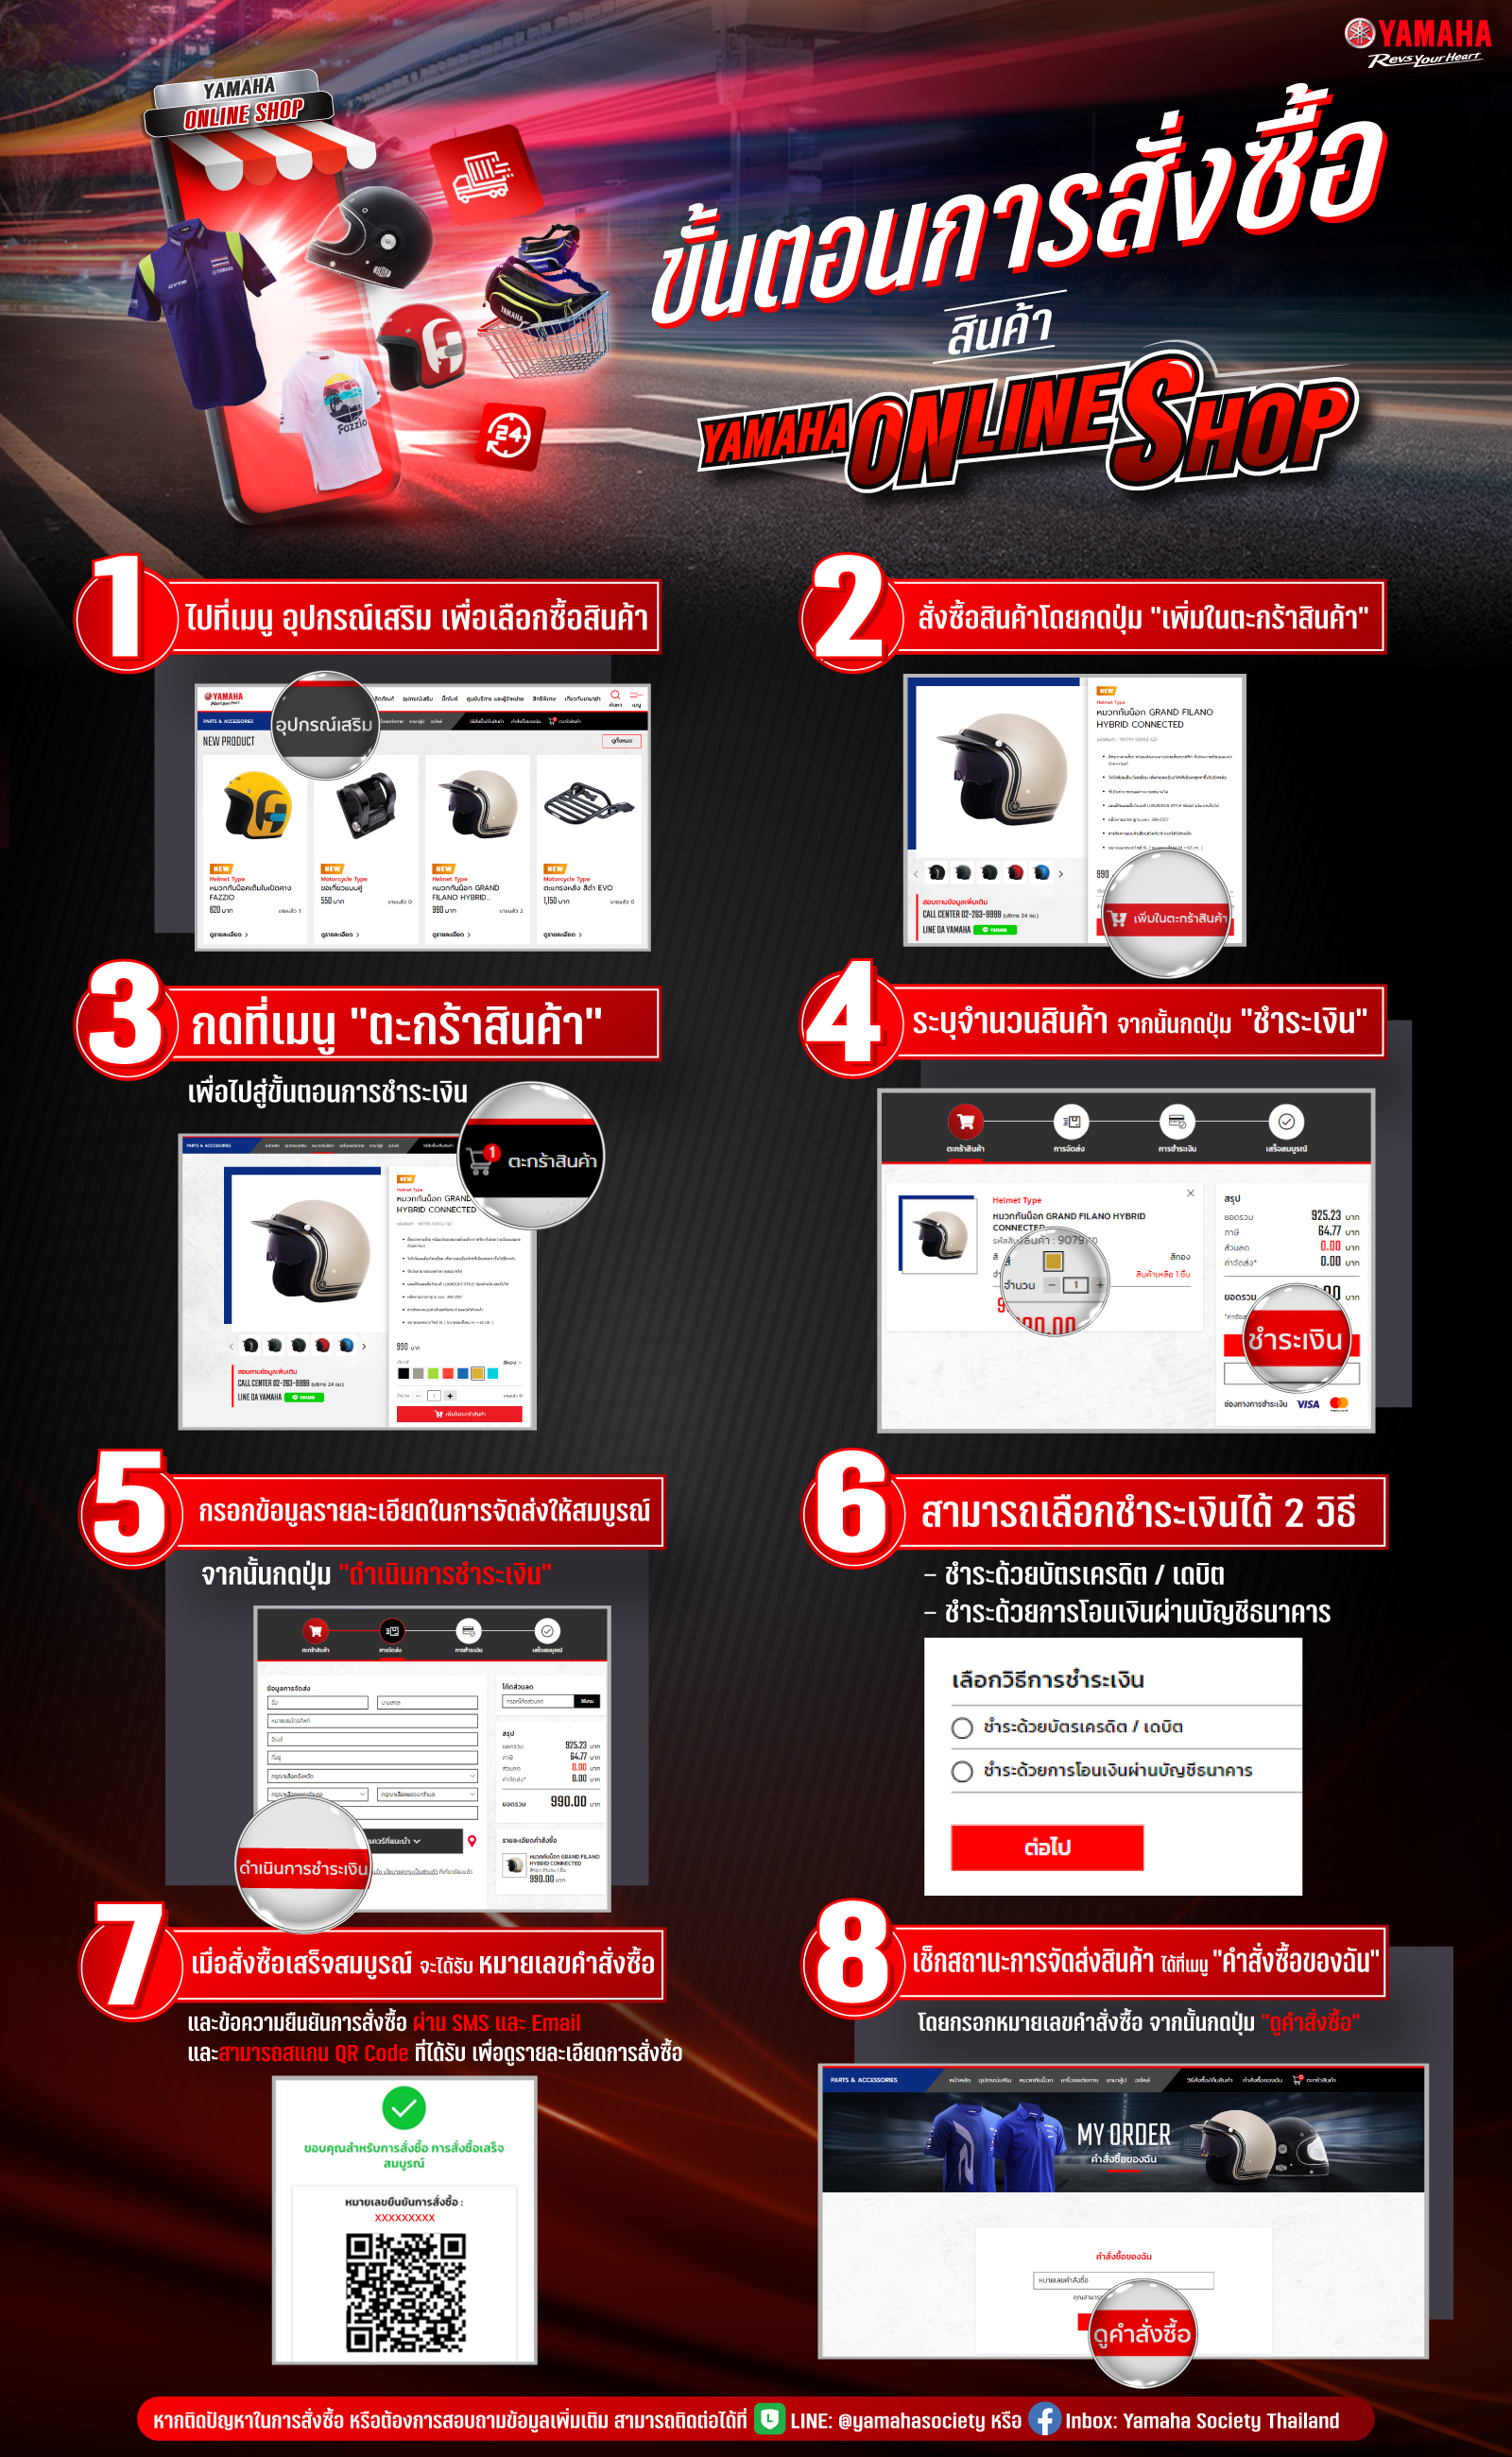 Yamaha-Online-Shop-Infographic-How-to-order